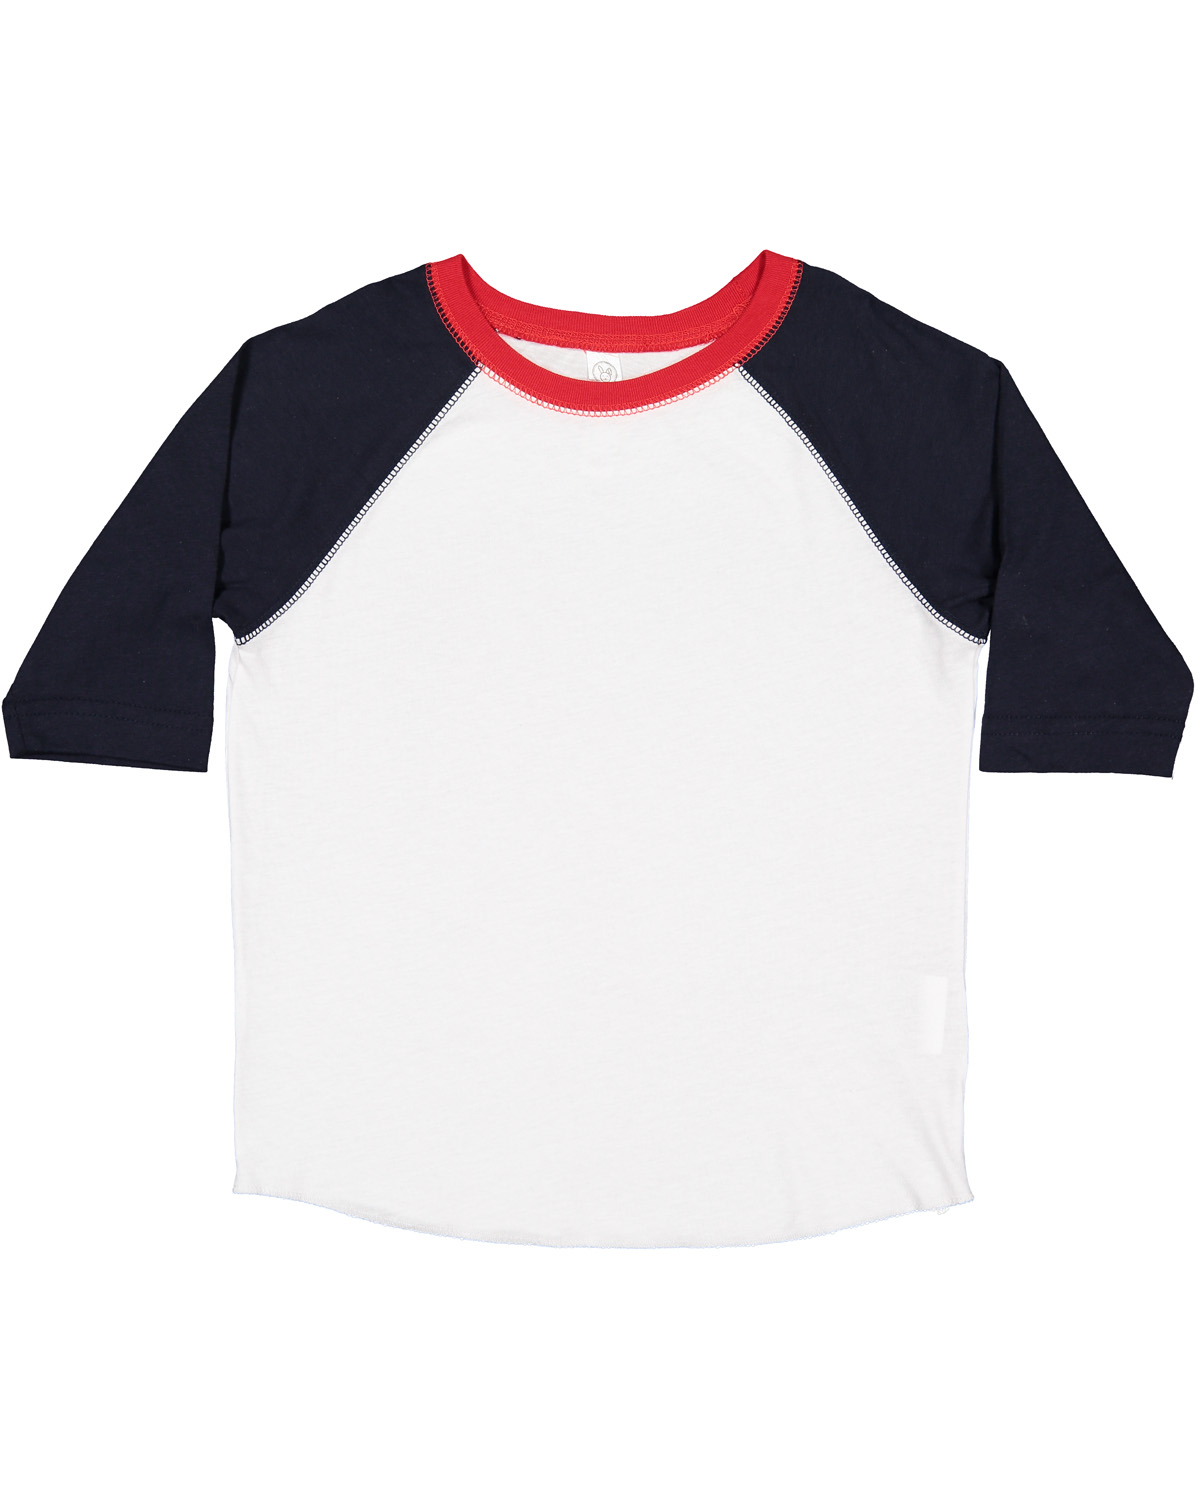 Selected Color is White/ Navy/ Red